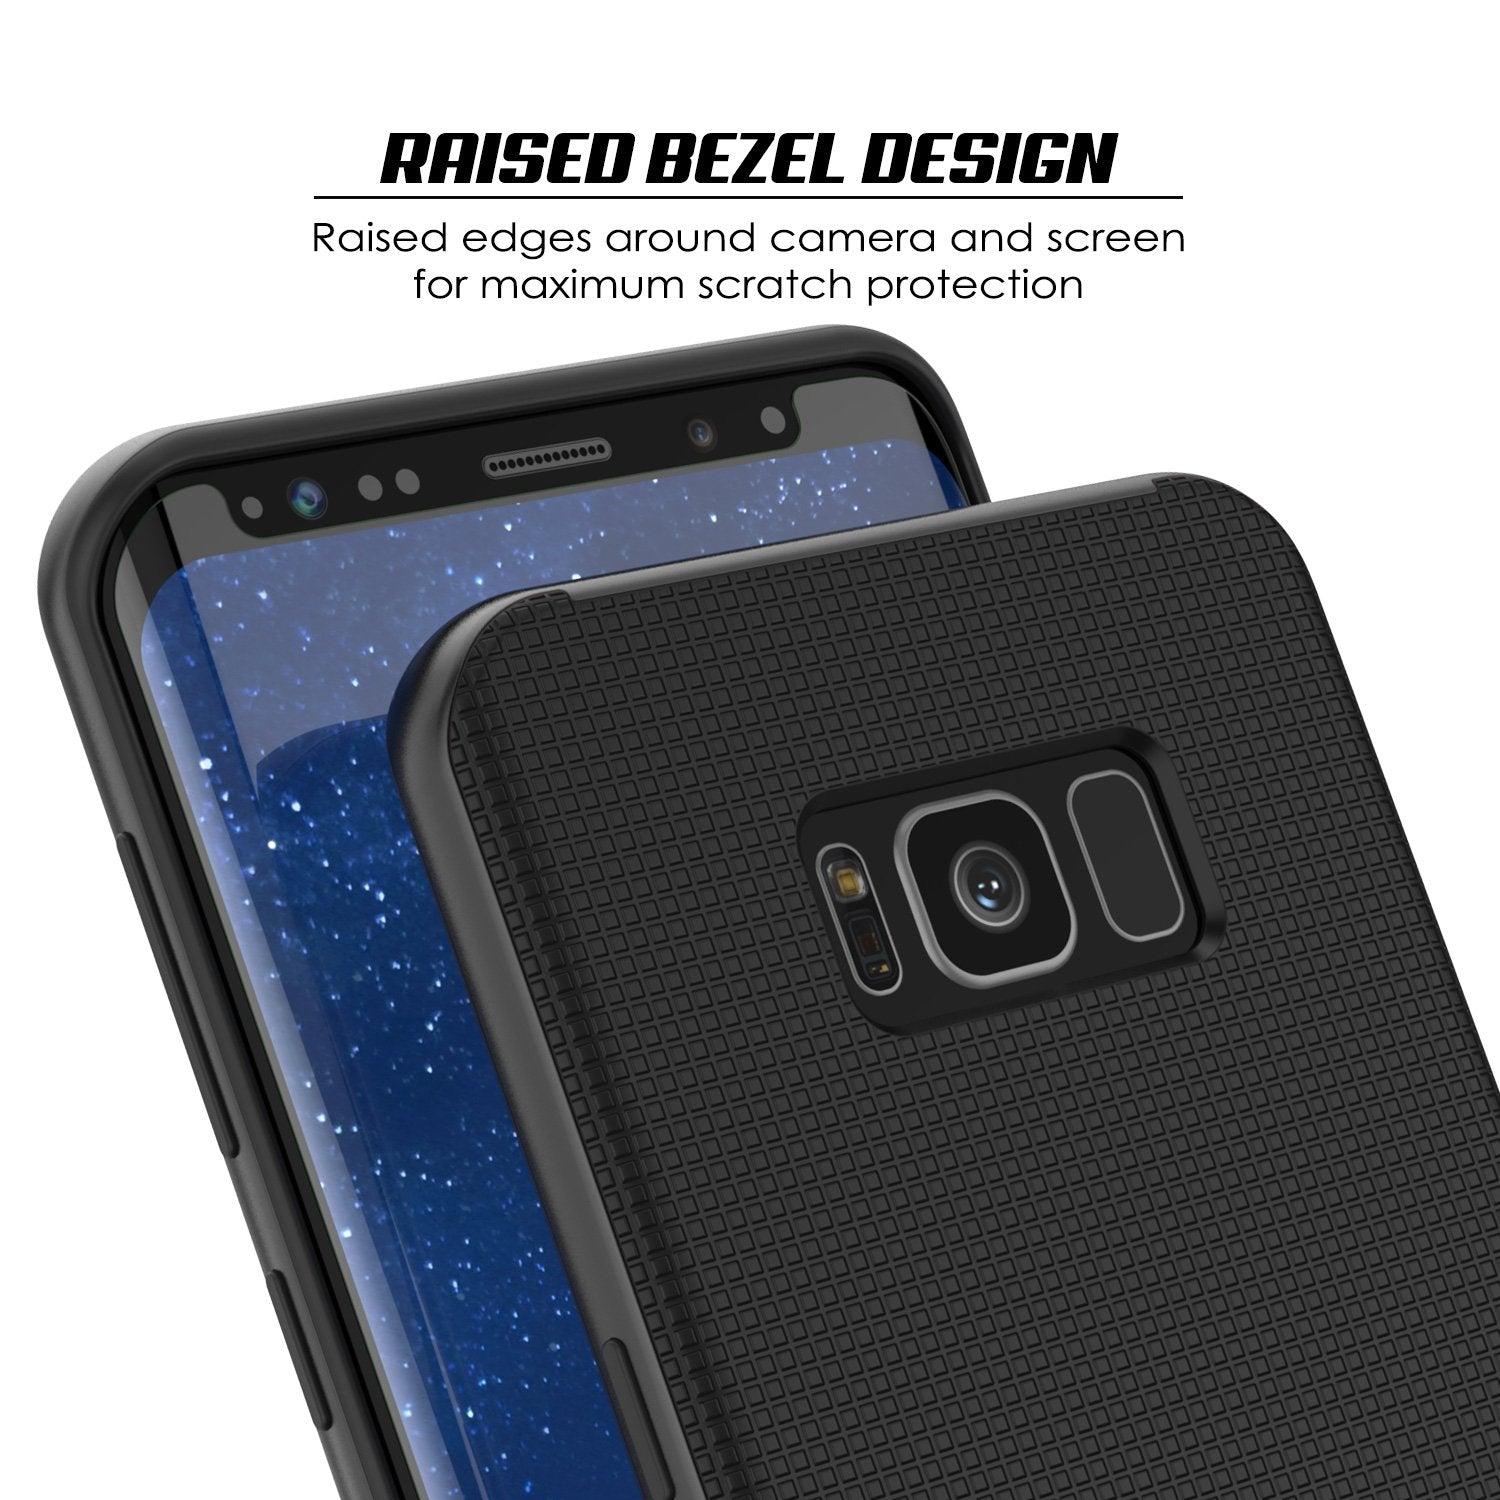 Galaxy S8 Case, PunkCase Stealth Series Hybrid Shockproof Black Cover